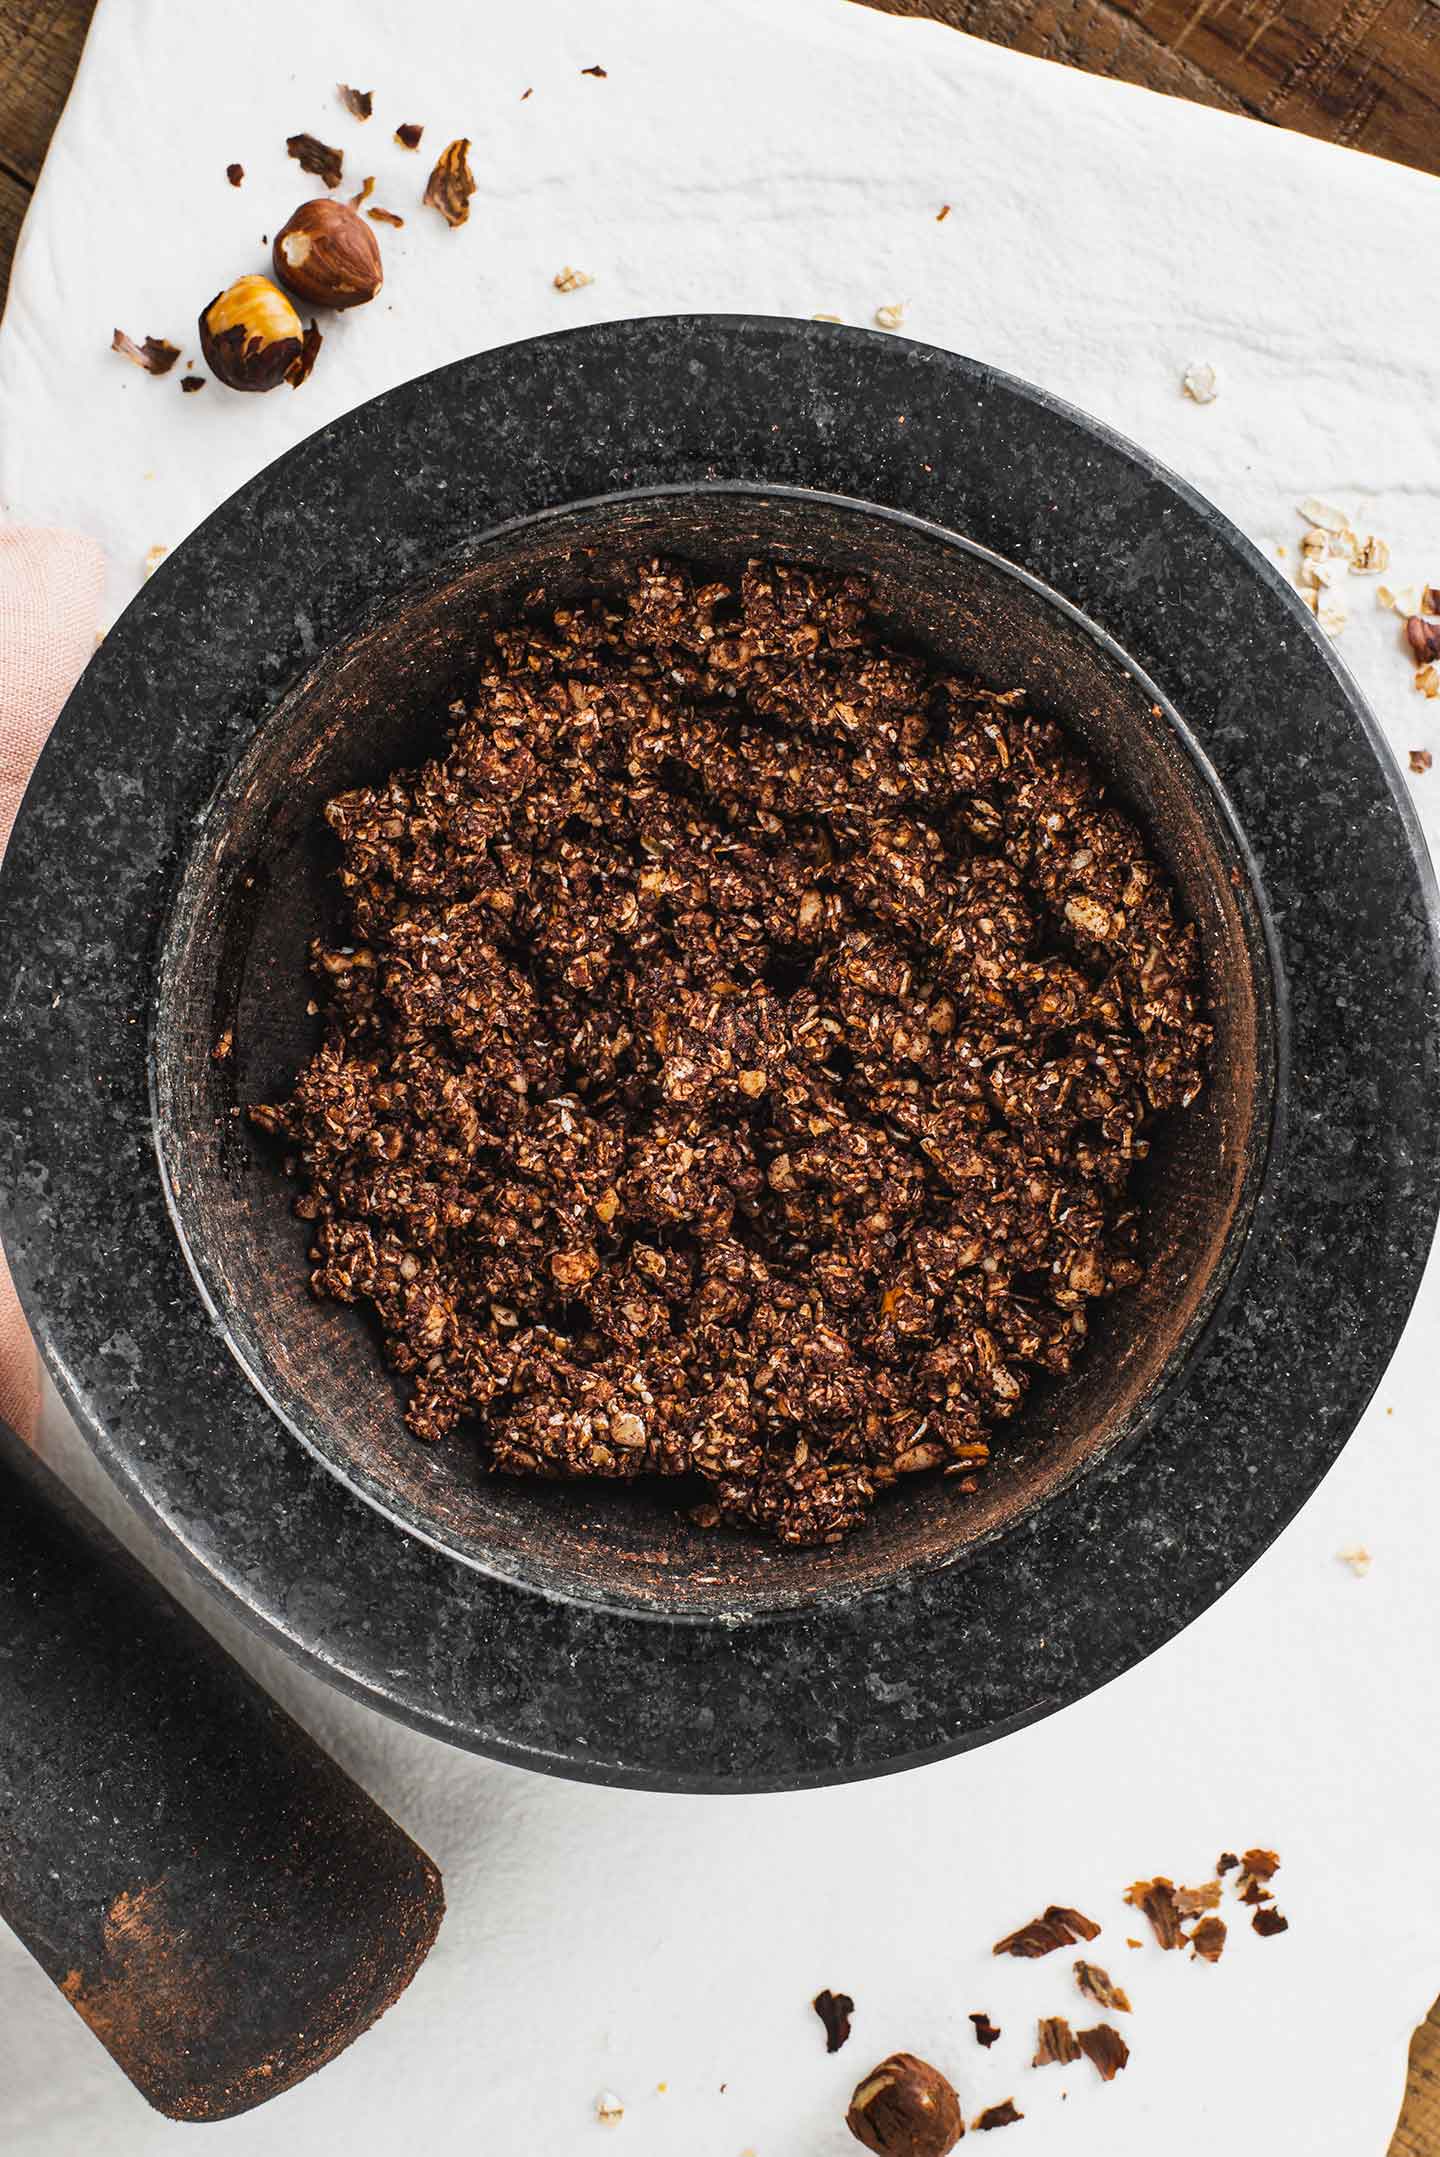 Top down view of a mixture of oats, hazelnuts, and cocoa powder in a mortar and pestle.